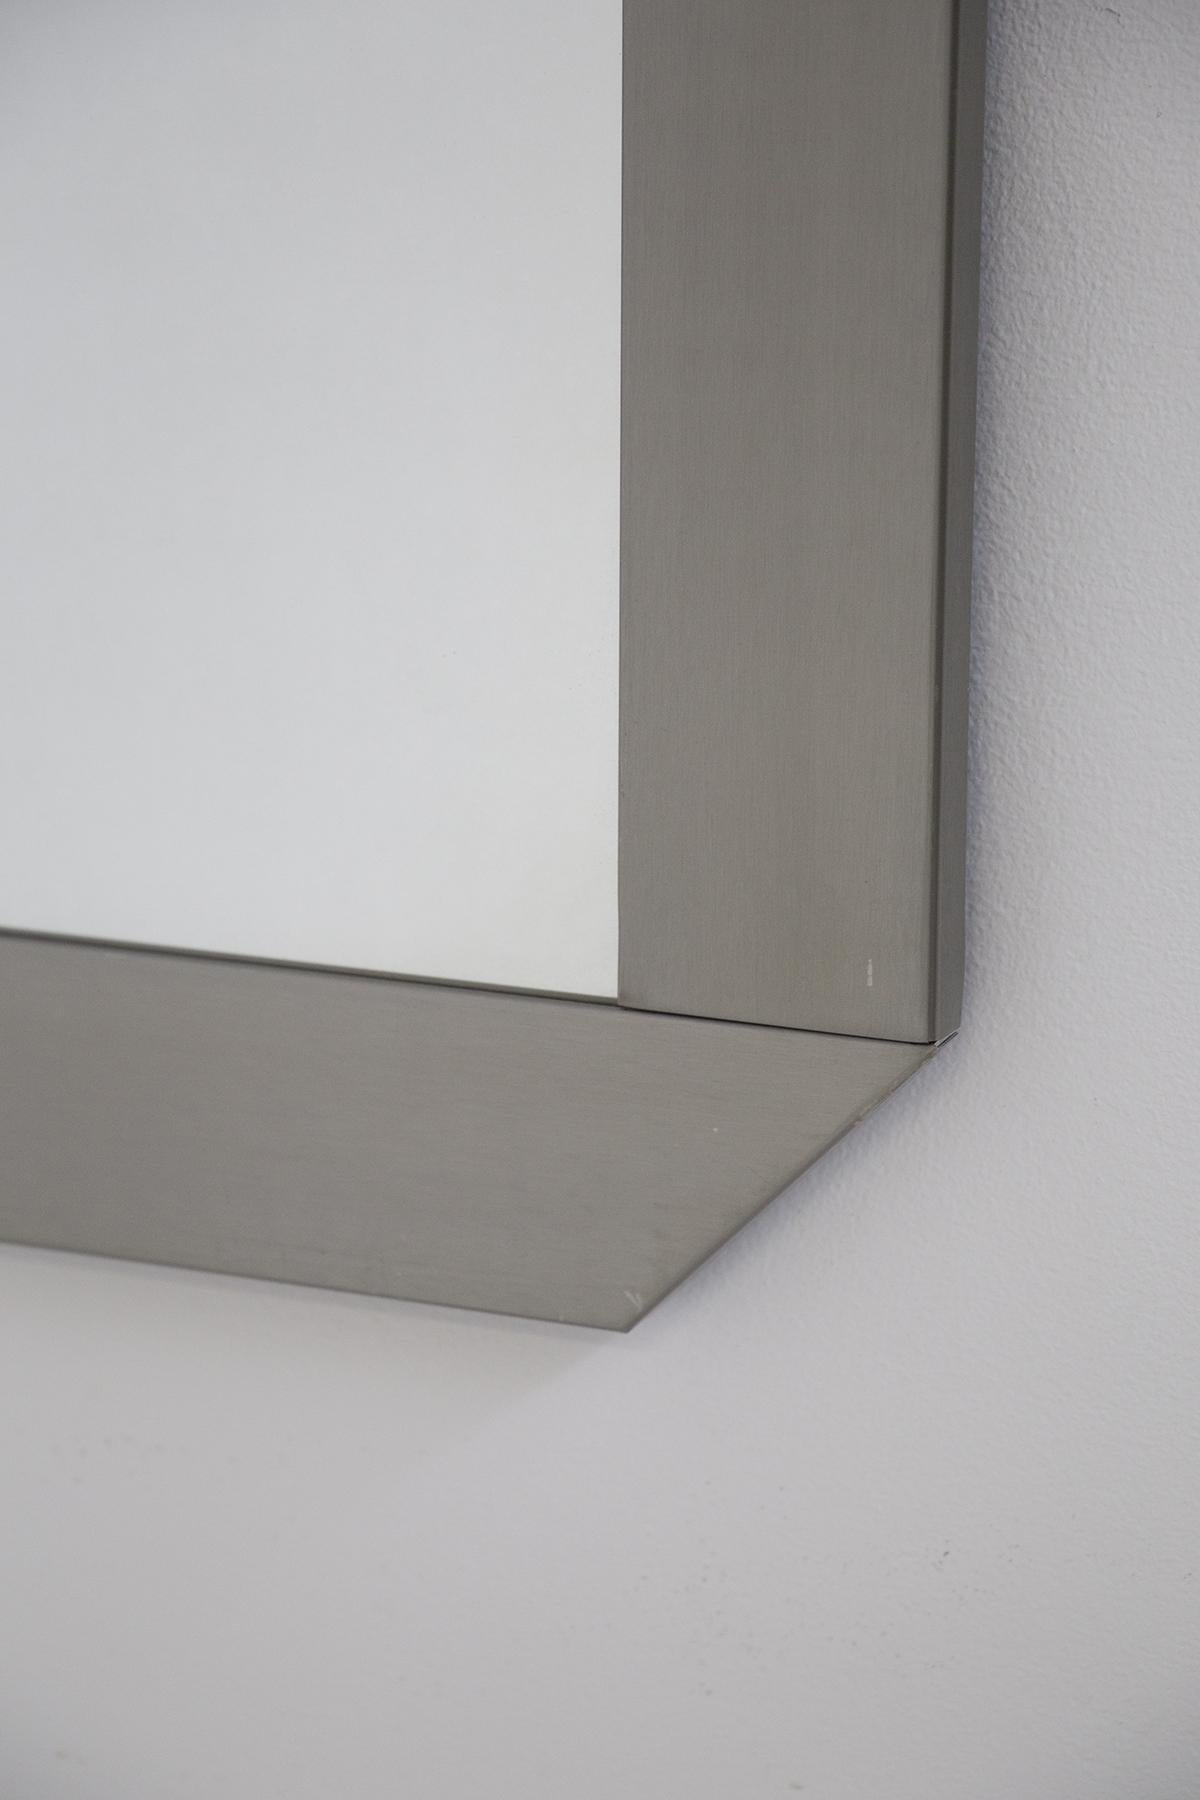 Italian Vintage Square Mirror by Vittorio Introini for Residence Vips For Sale